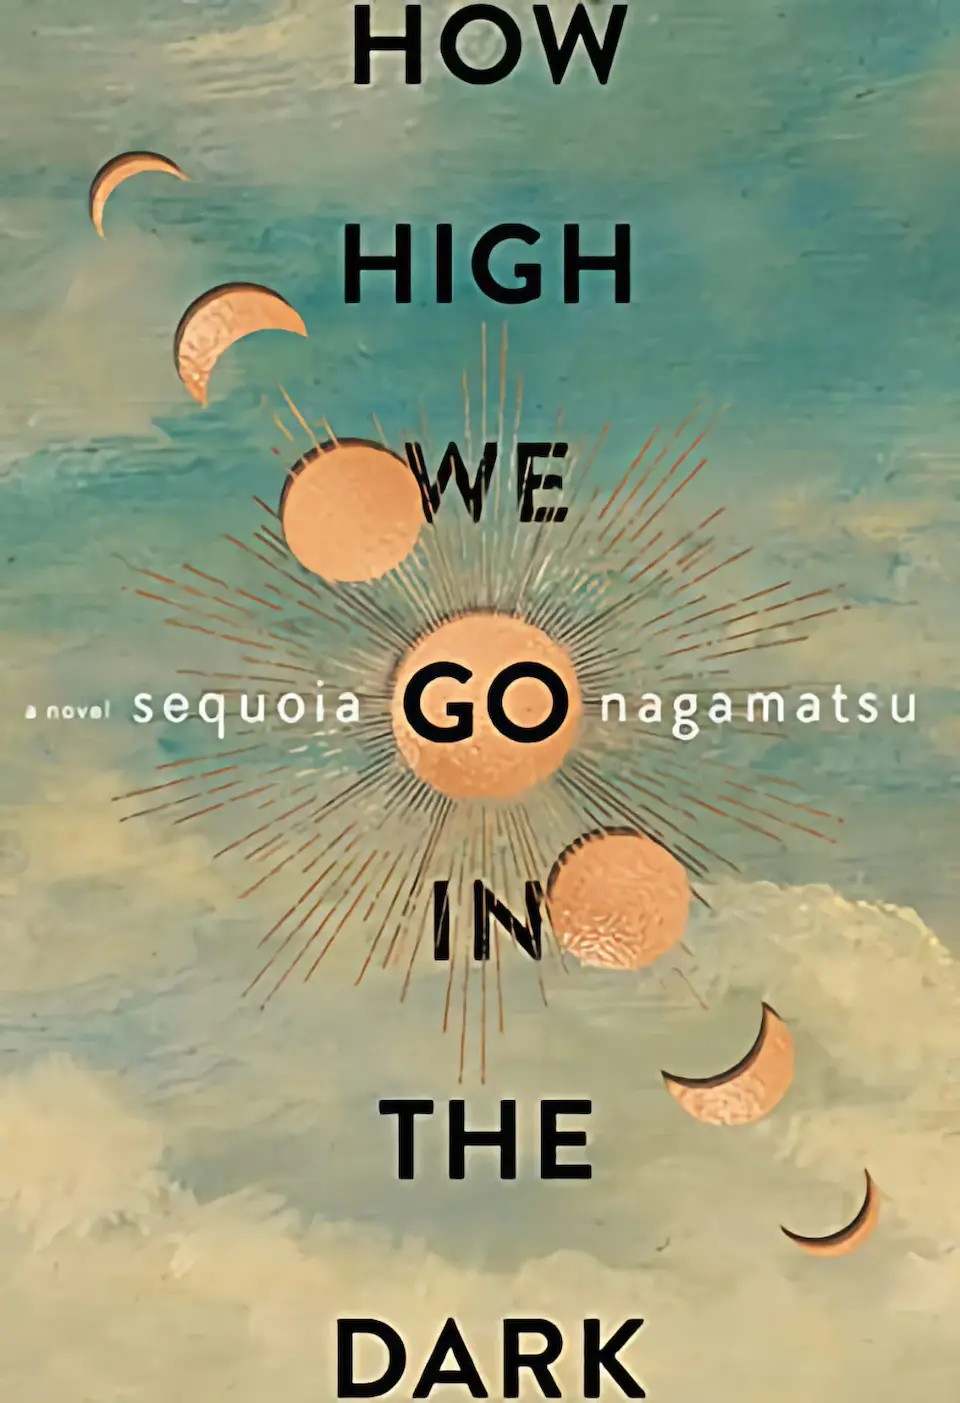 How High We Go in the Dark by Sequoia Nagamatsu finished on 2022 Jun 21